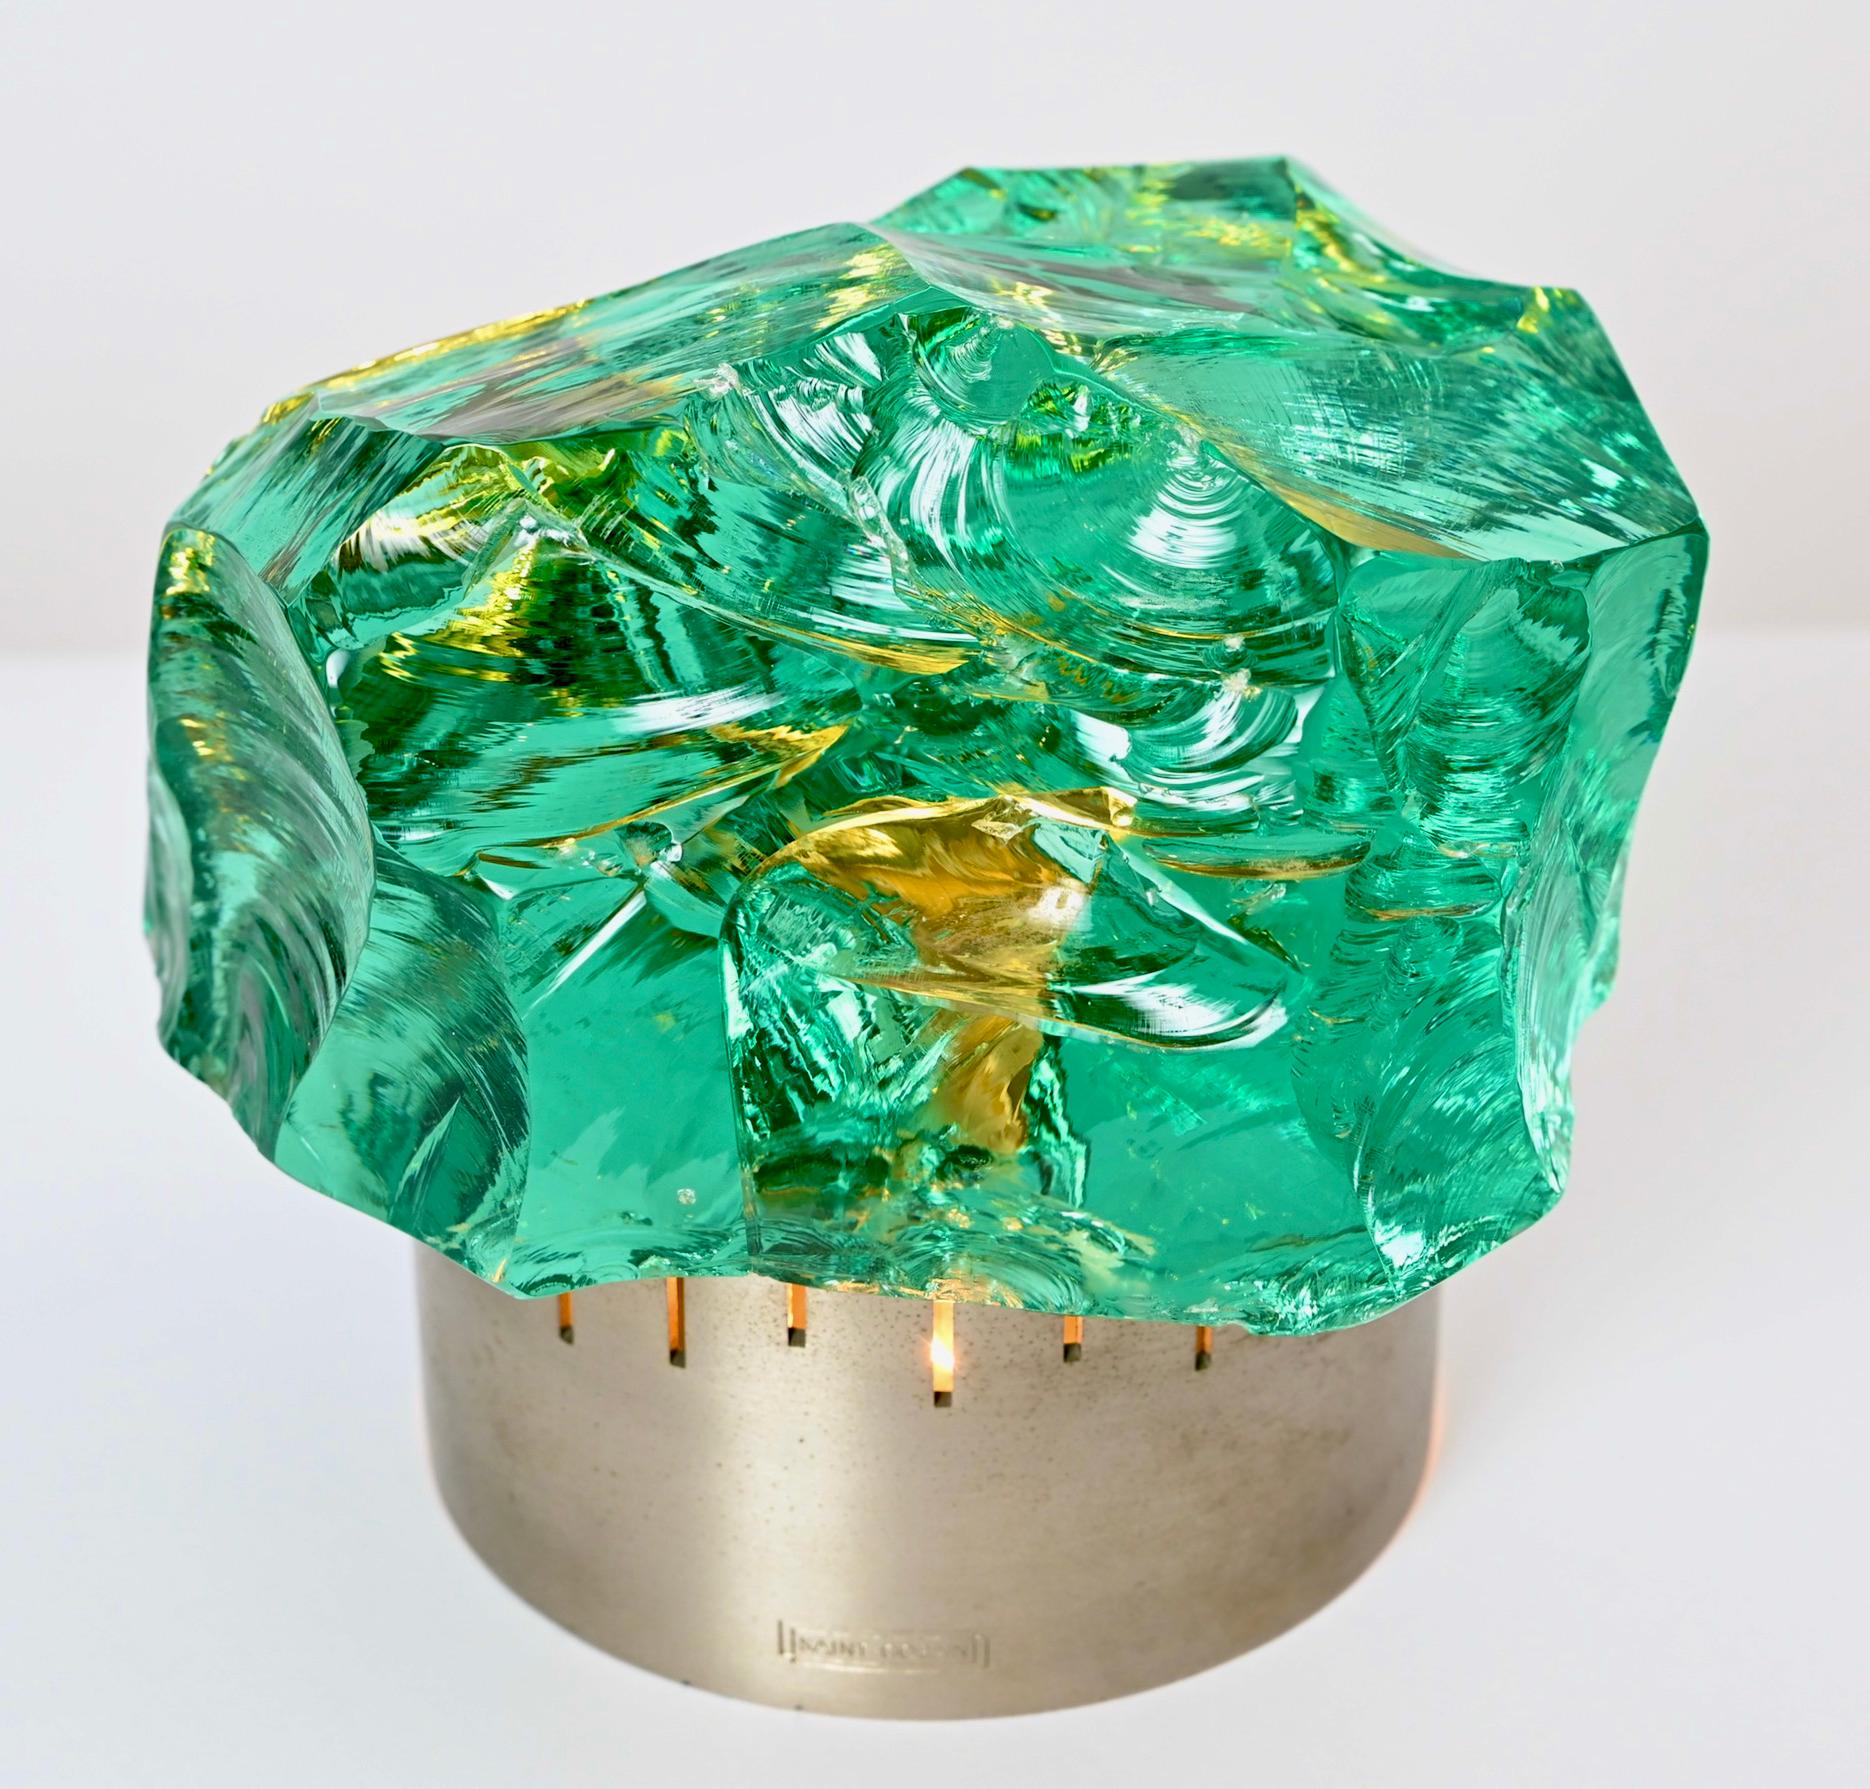 This beautiful crystal table lamp was designed by Max Ingrand for the renowned French glass company, Saint-Gobain. Produced in the 1960s, the chiseled emerald green coloured crystal sits on a brushed, nickel-plated brass circular base. Each one of